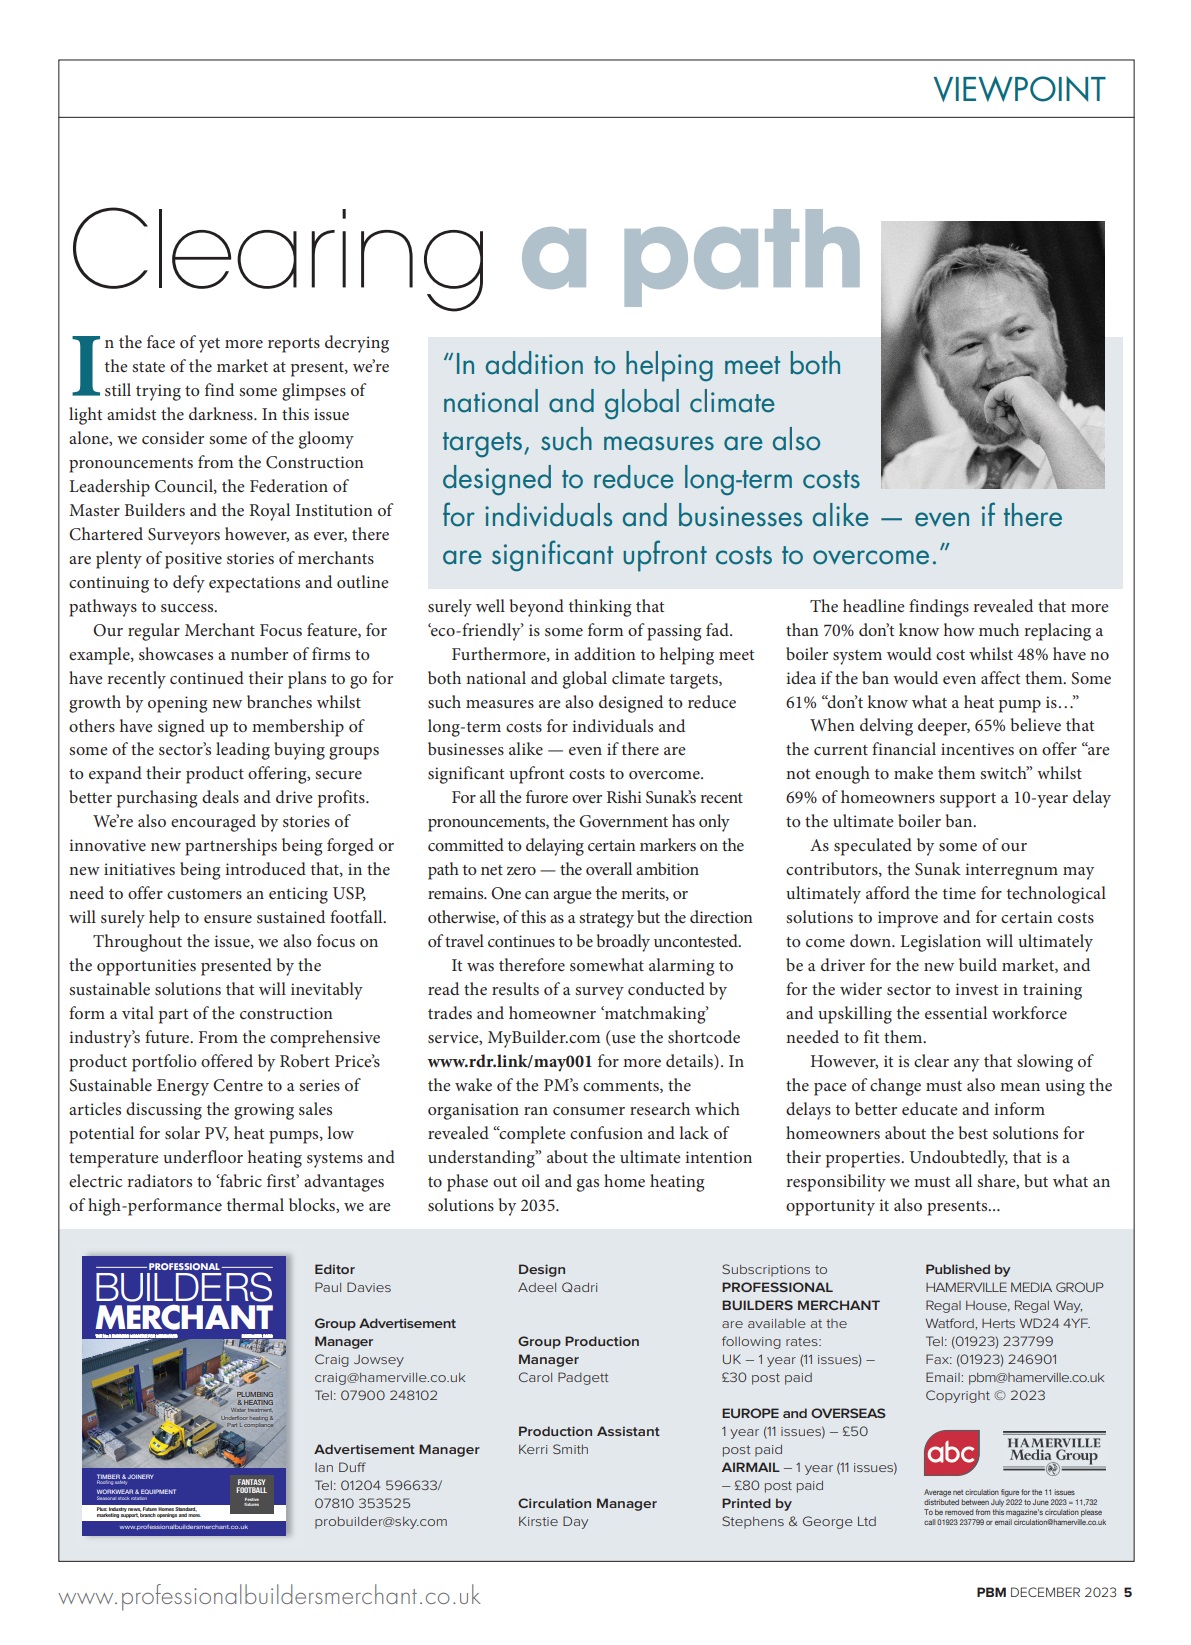 With a focus on the need to grow the market for sustainable solutions, Editor Paul Davies uses his column in the December issue of PBM to cut through the latest reports of construction sector doom and gloom.